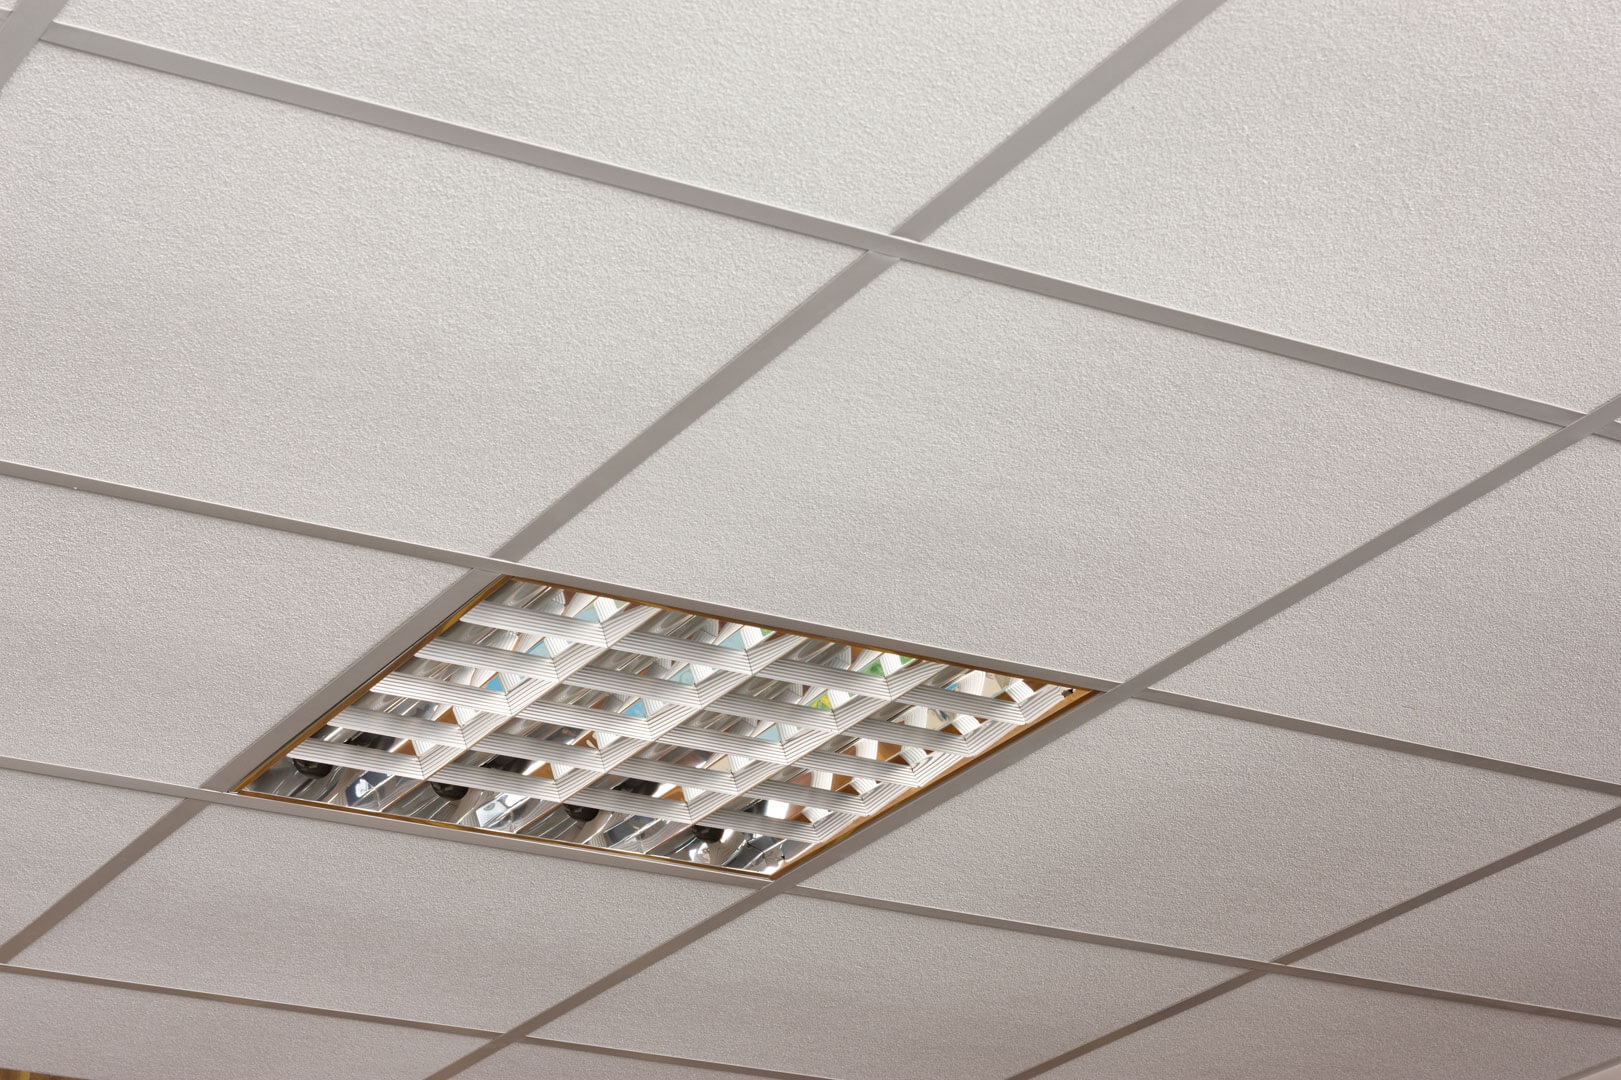 Armstrong Cortega 600×600 Suspended Ceiling Tiles